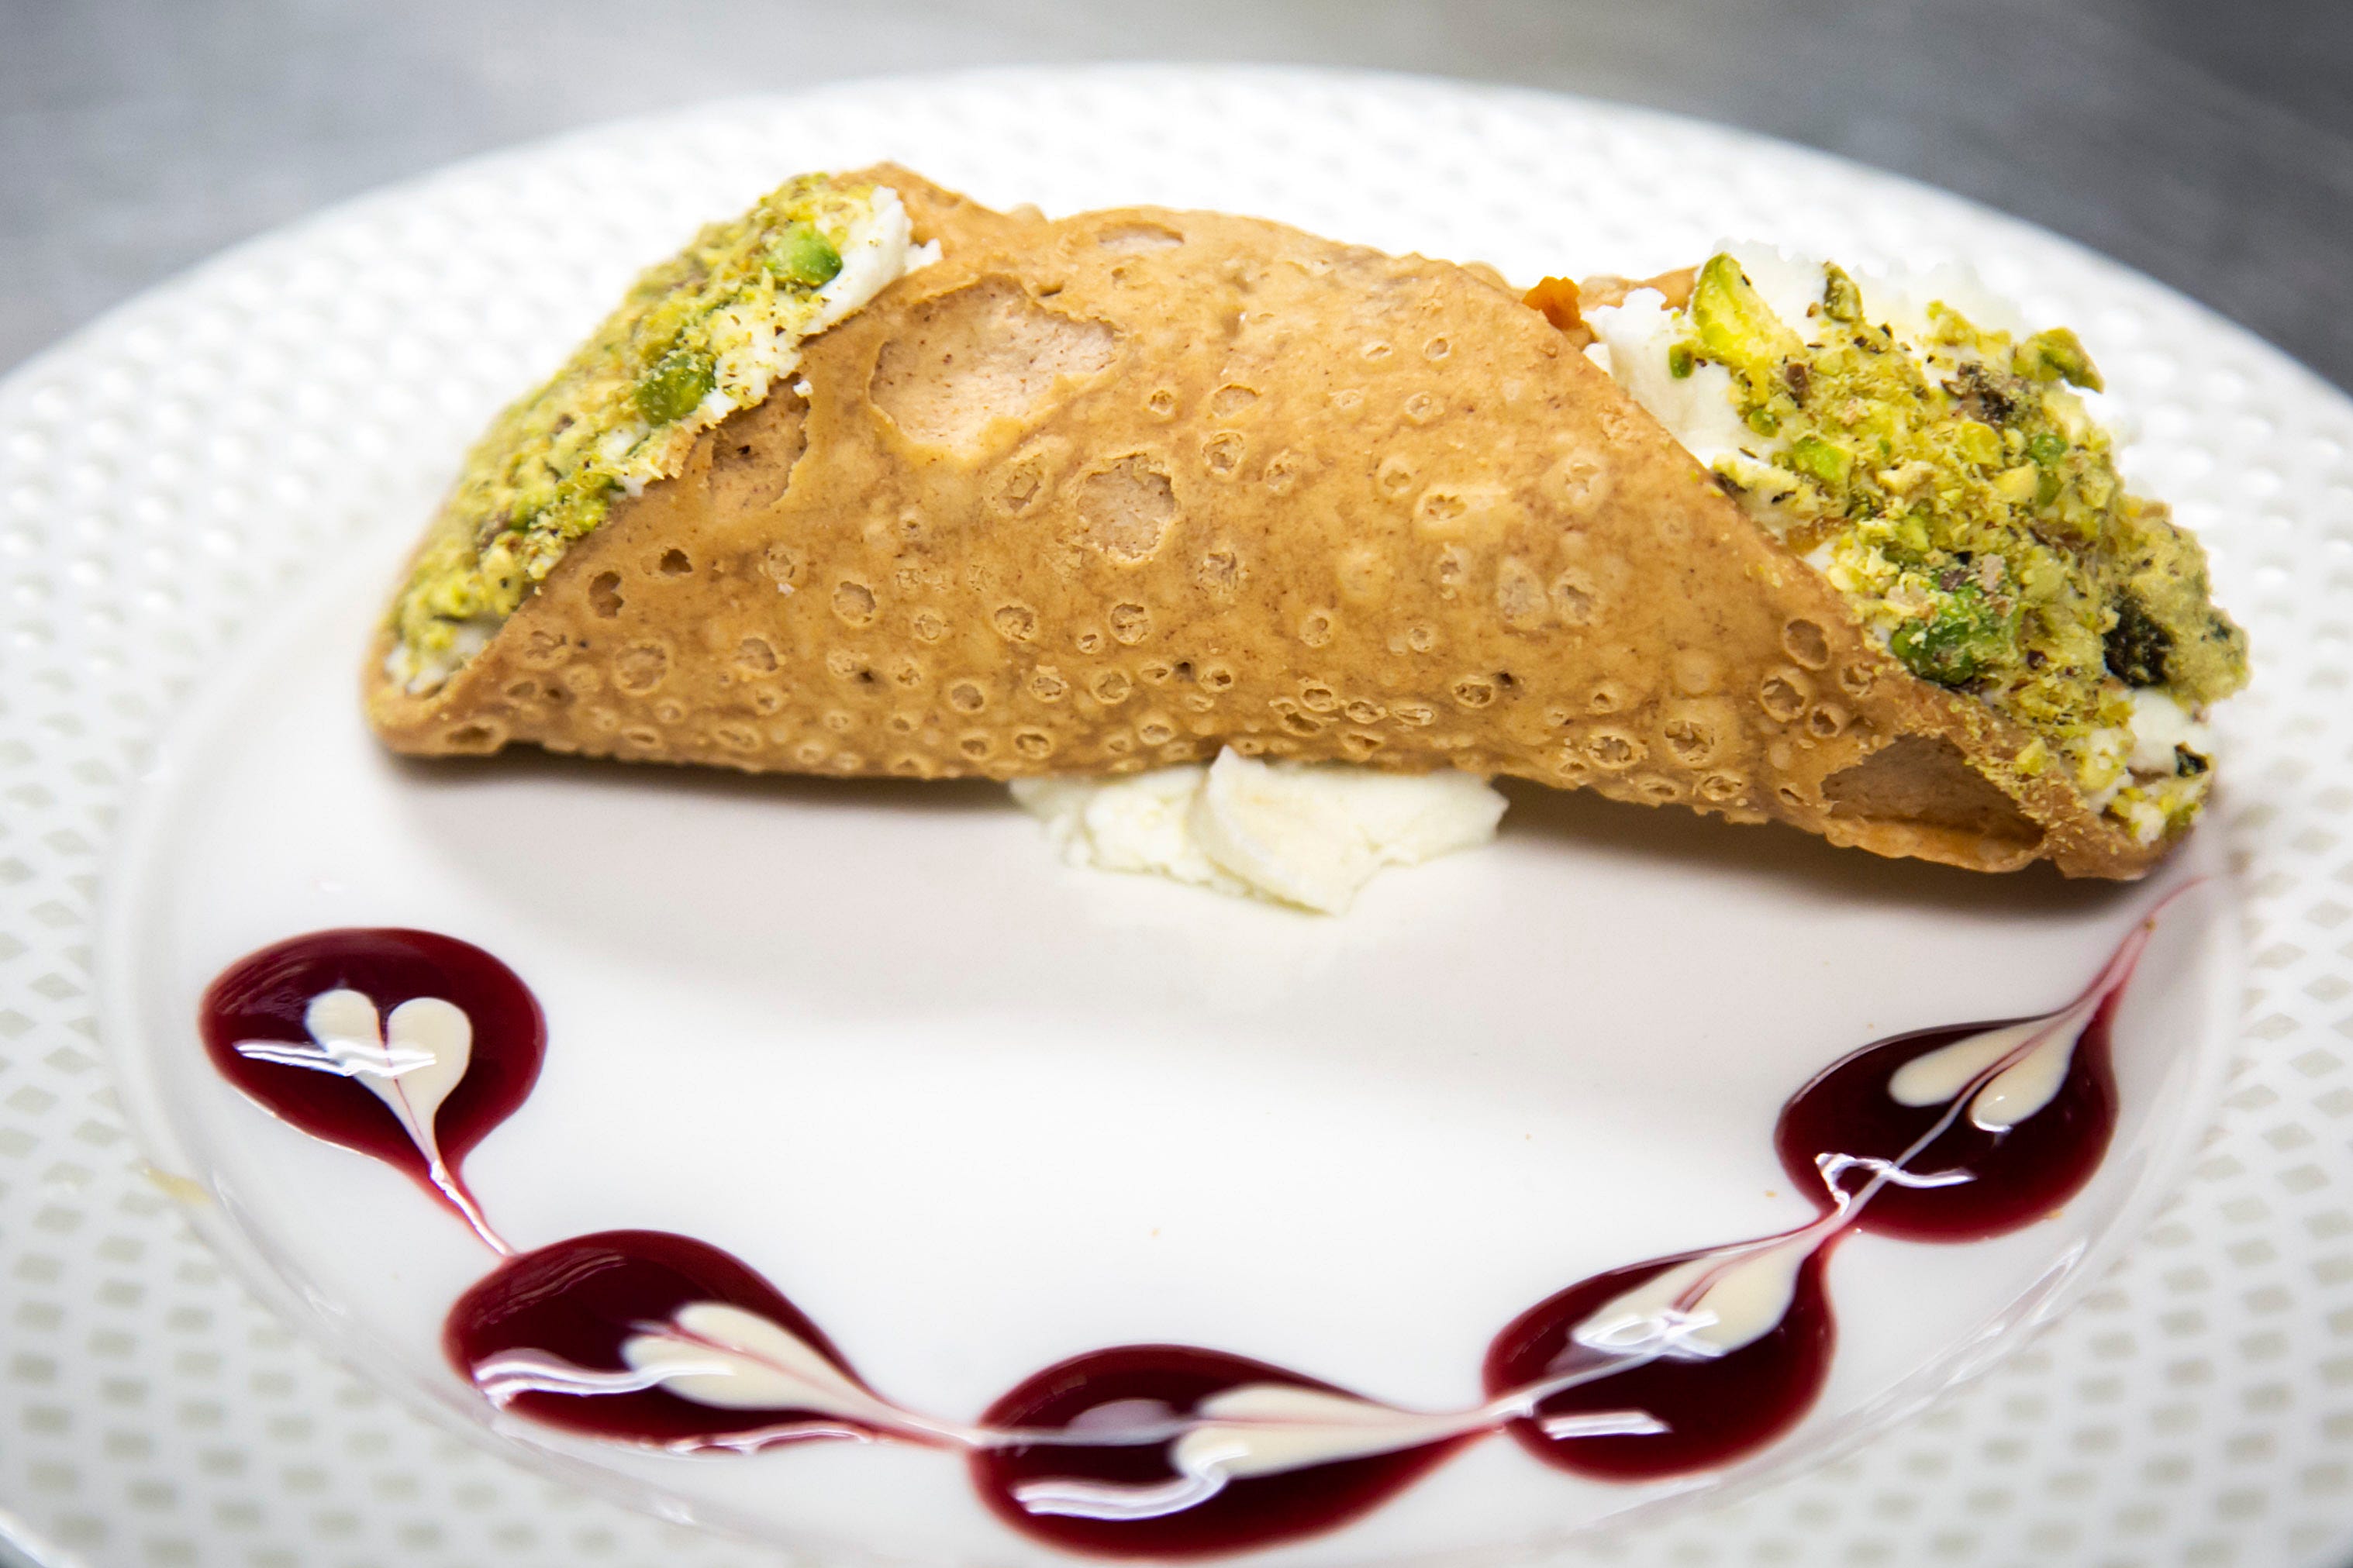 A cannoli with crushed pistachios is seen, Wednesday, Nov. 17, 2021, at Grand Living at Bridgewater in Coralville, Iowa.